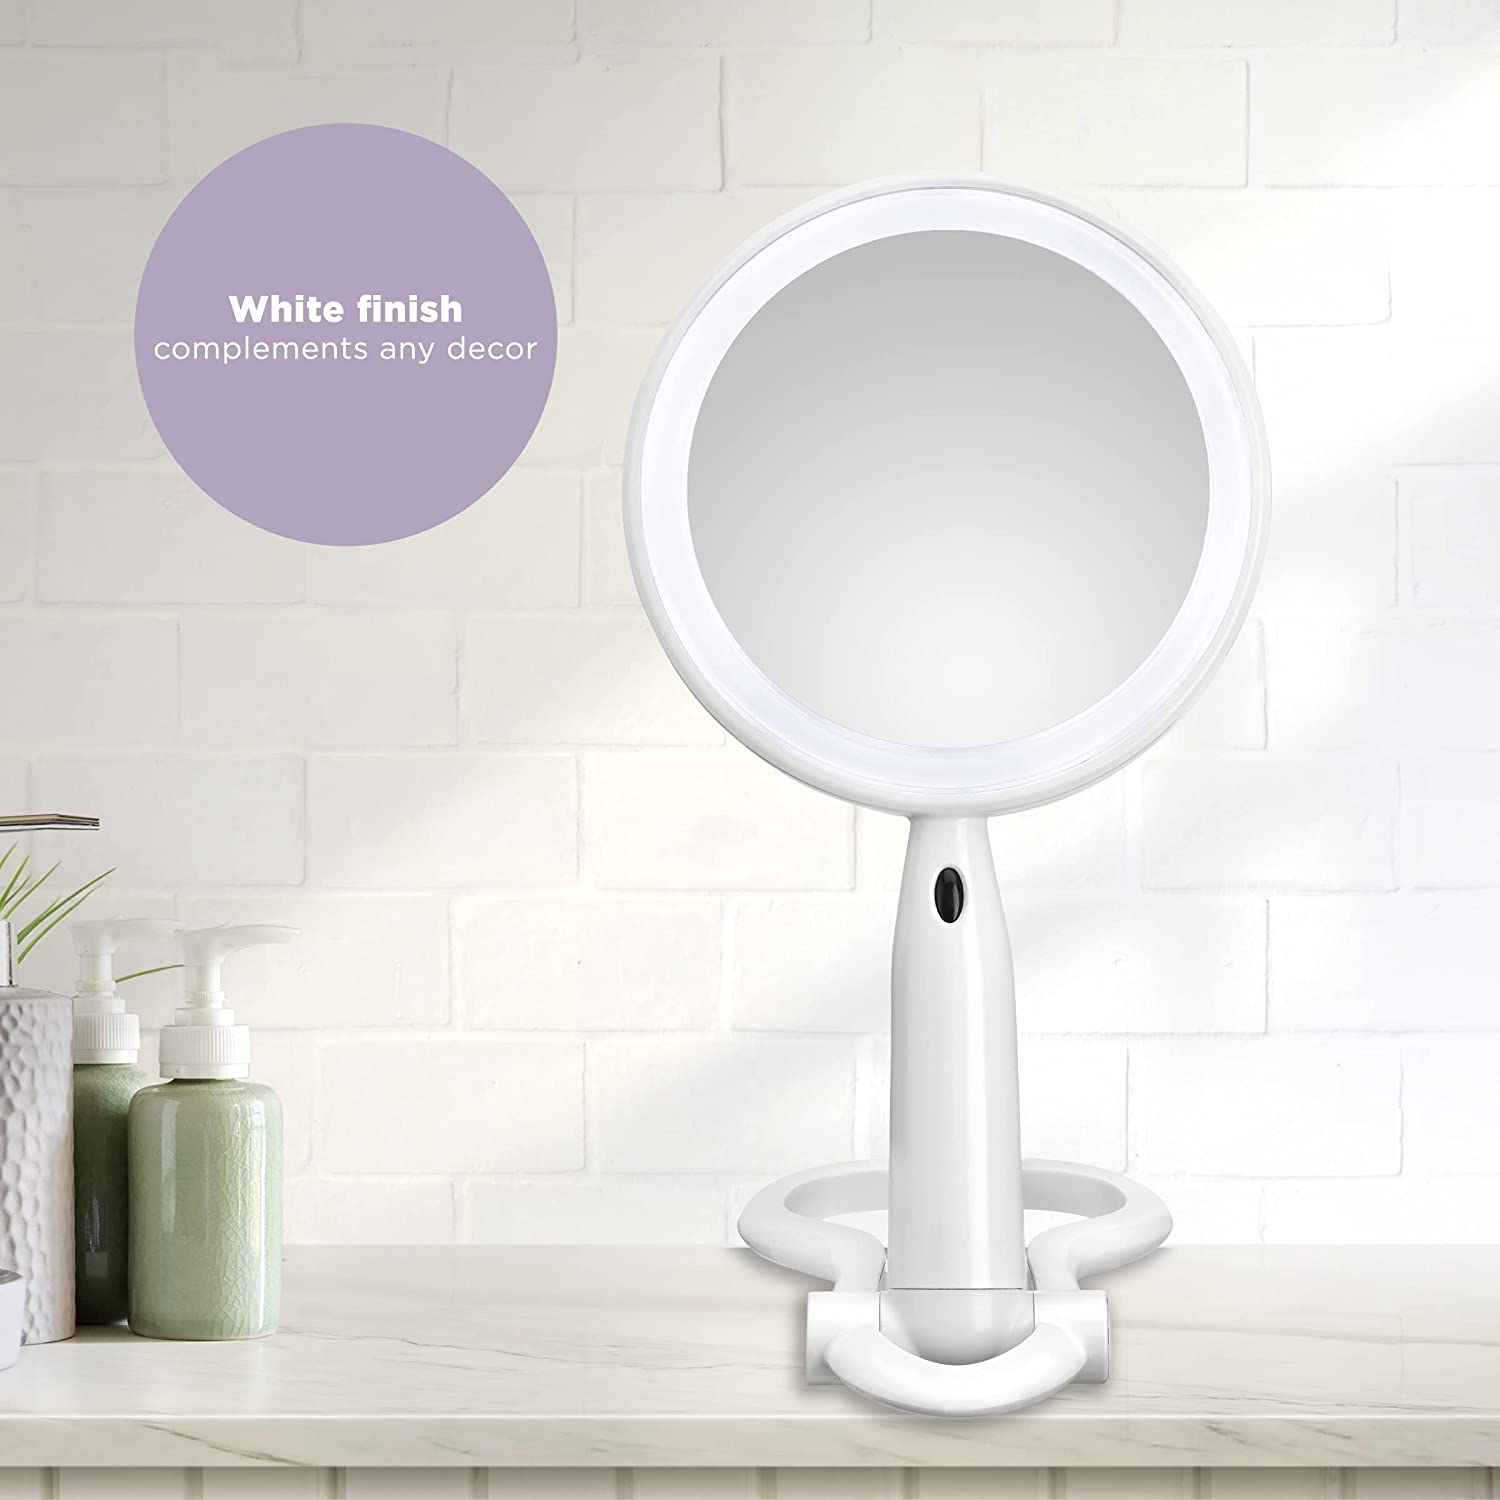 Conair Plastic Double-Sided Lighted Makeup Mirror - Lighted Vanity Makeup Mirror with LED Lights; 1x/3x magnification; White; compact - great for travel - BE52LED-2P